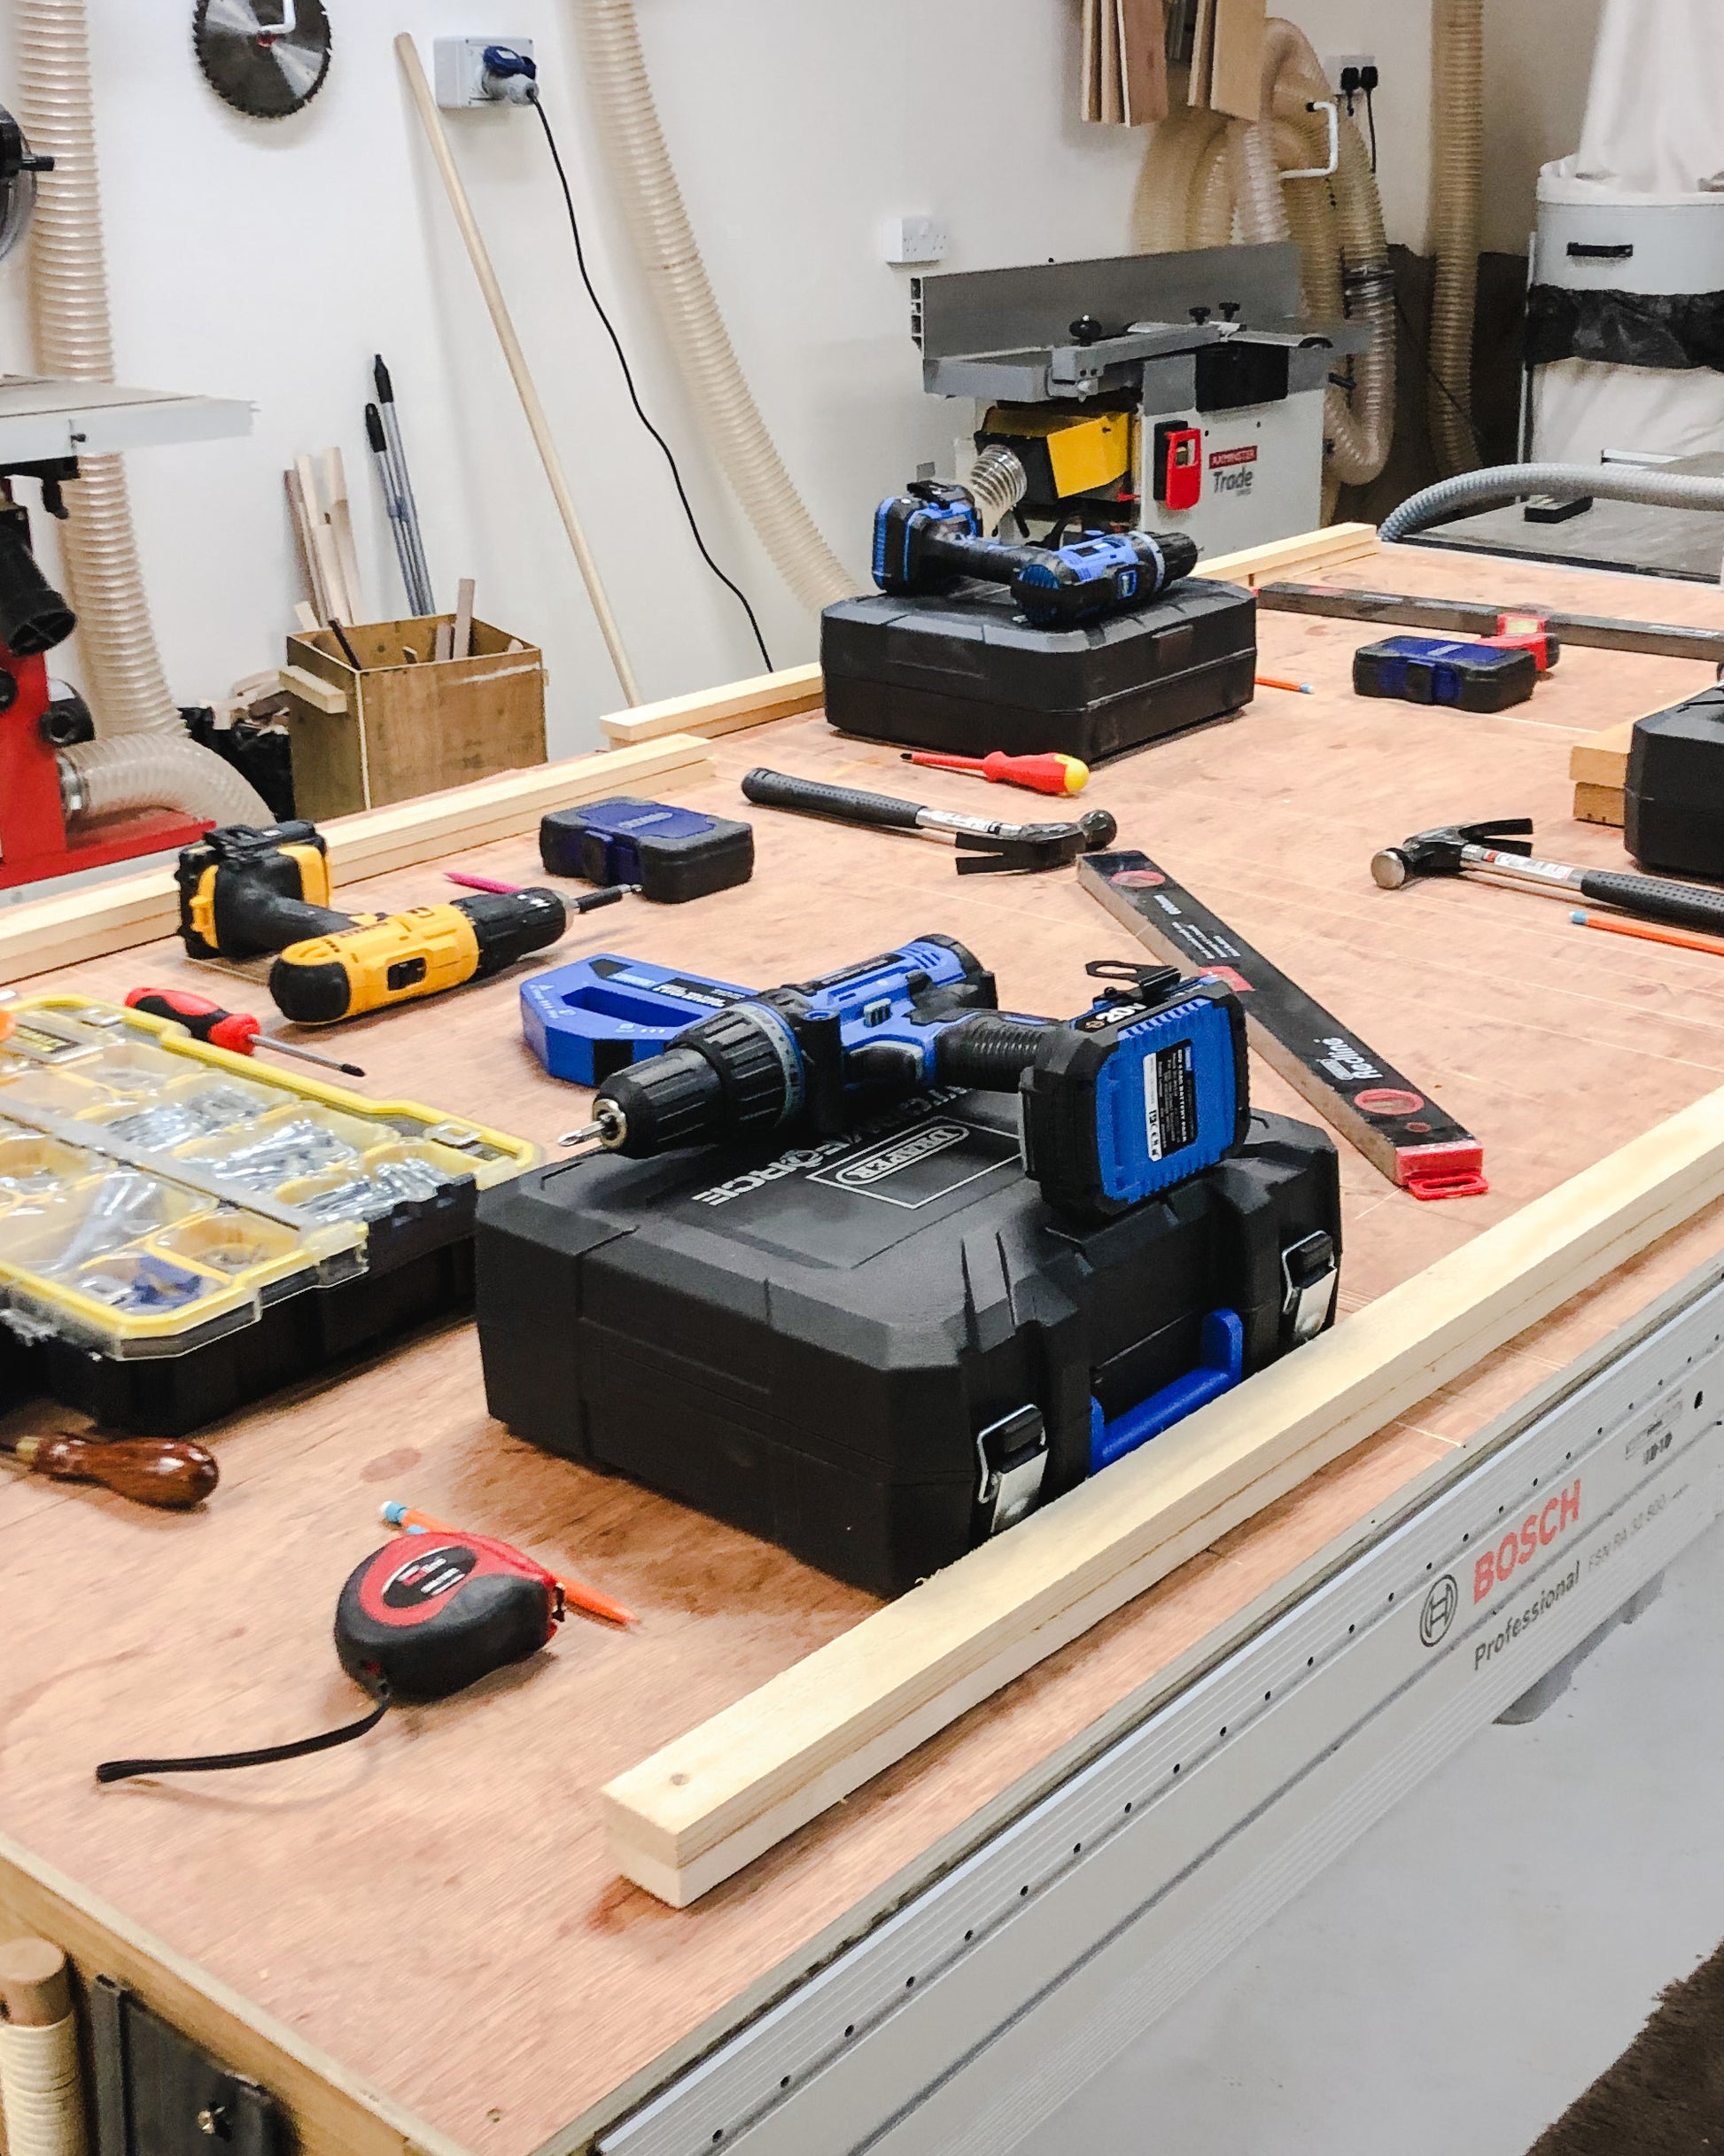 Get practical experience with a range of tools on a beginners DIY course